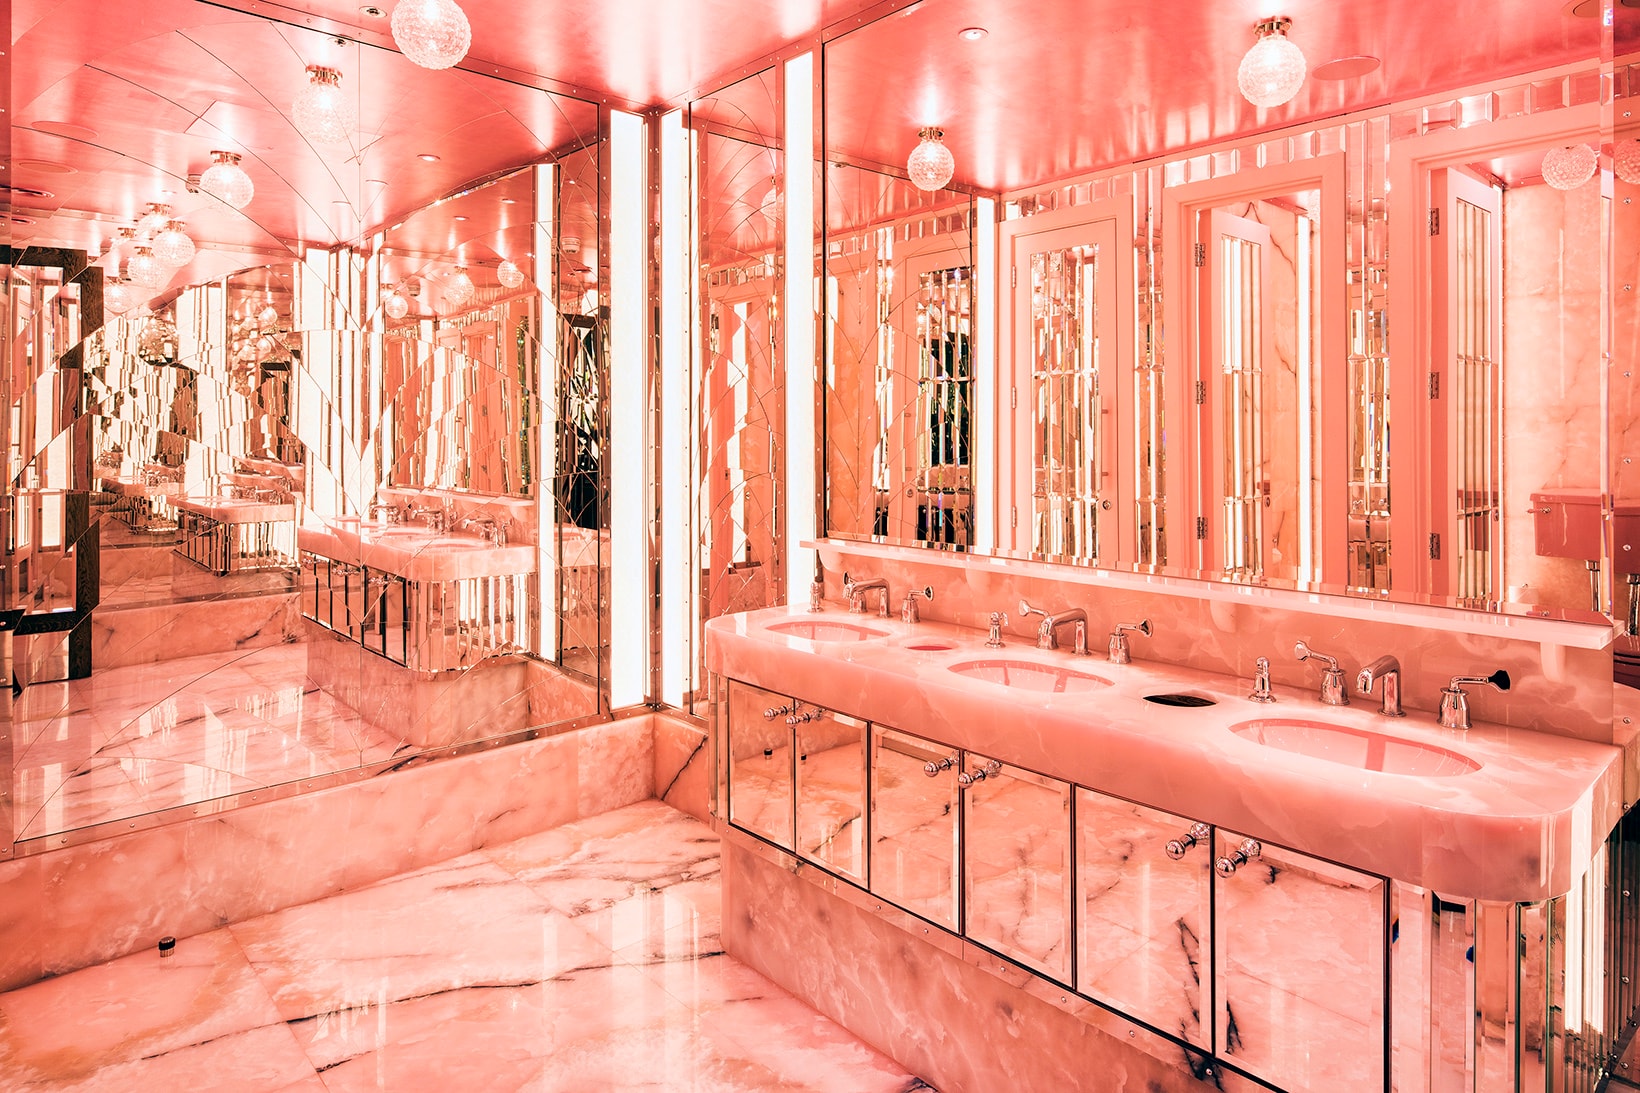 Most Instagrammable Instagram Bathroom Locations Restrooms Toilets London Sketch Annabel's Restaurant Ours Hoxton Holborn The Ned Brasserie of light selfridges